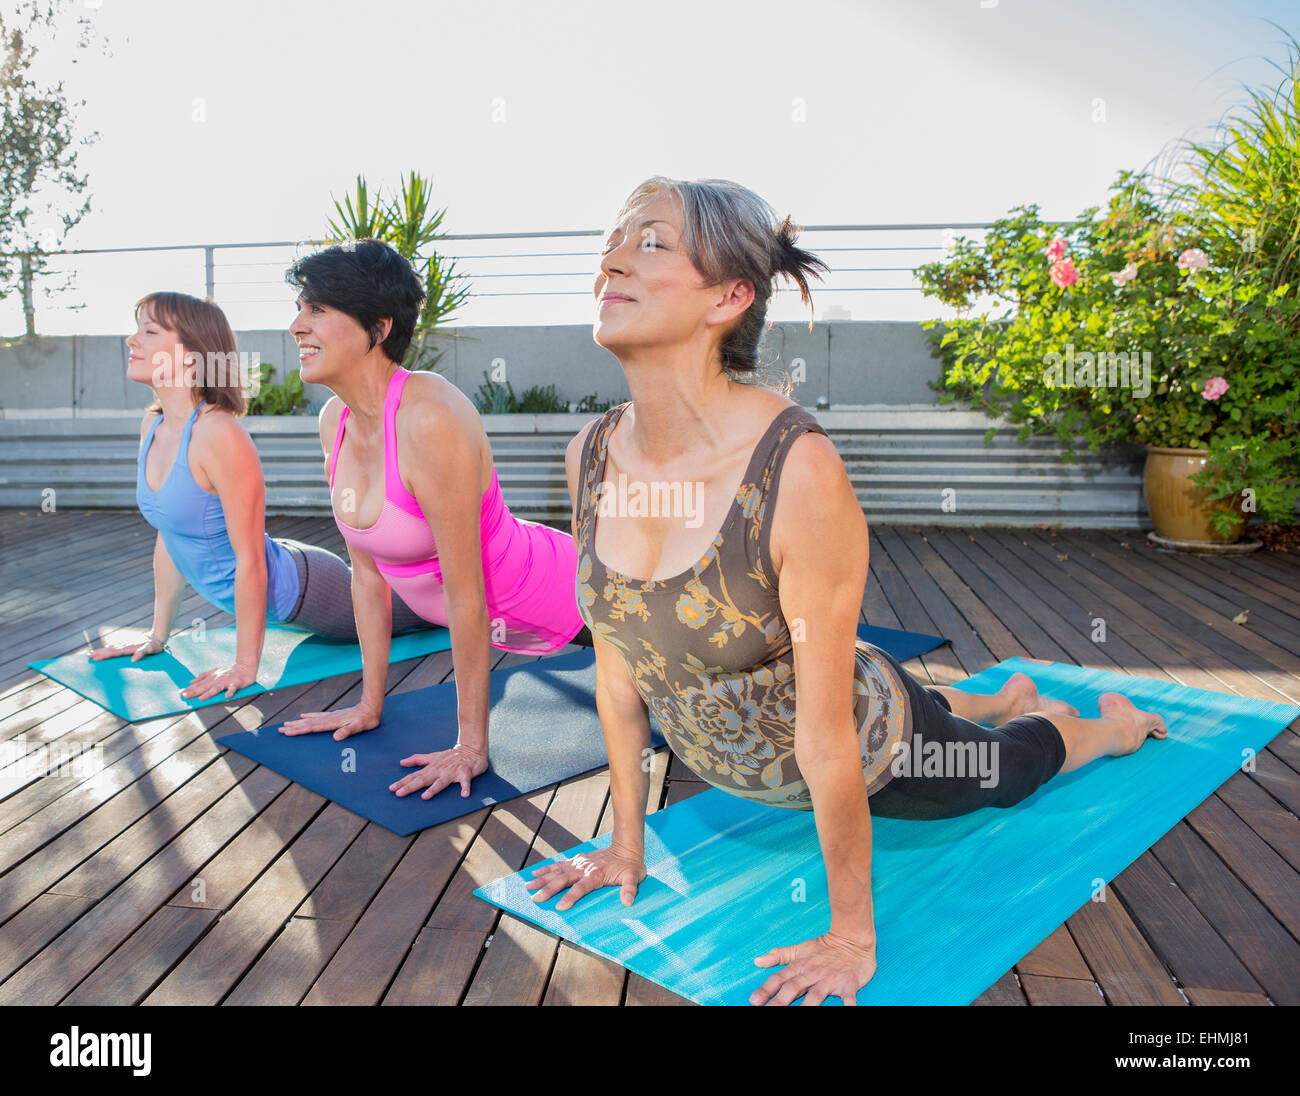 Women practicing yoga together on urban rooftop Stock Photo